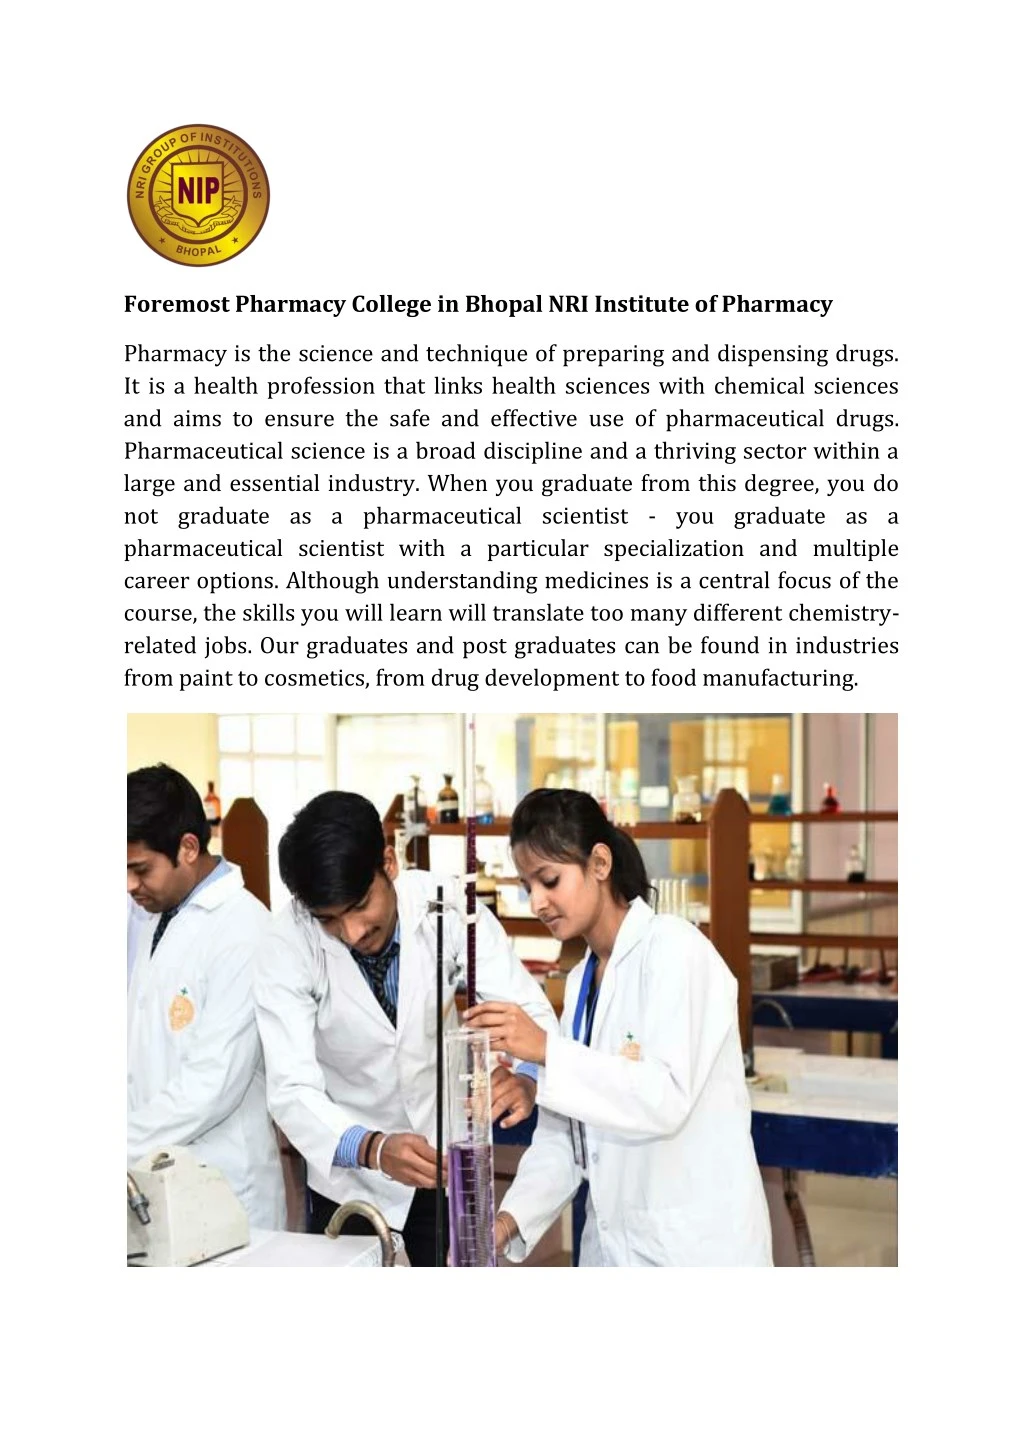 foremost pharmacy college in bhopal nri institute